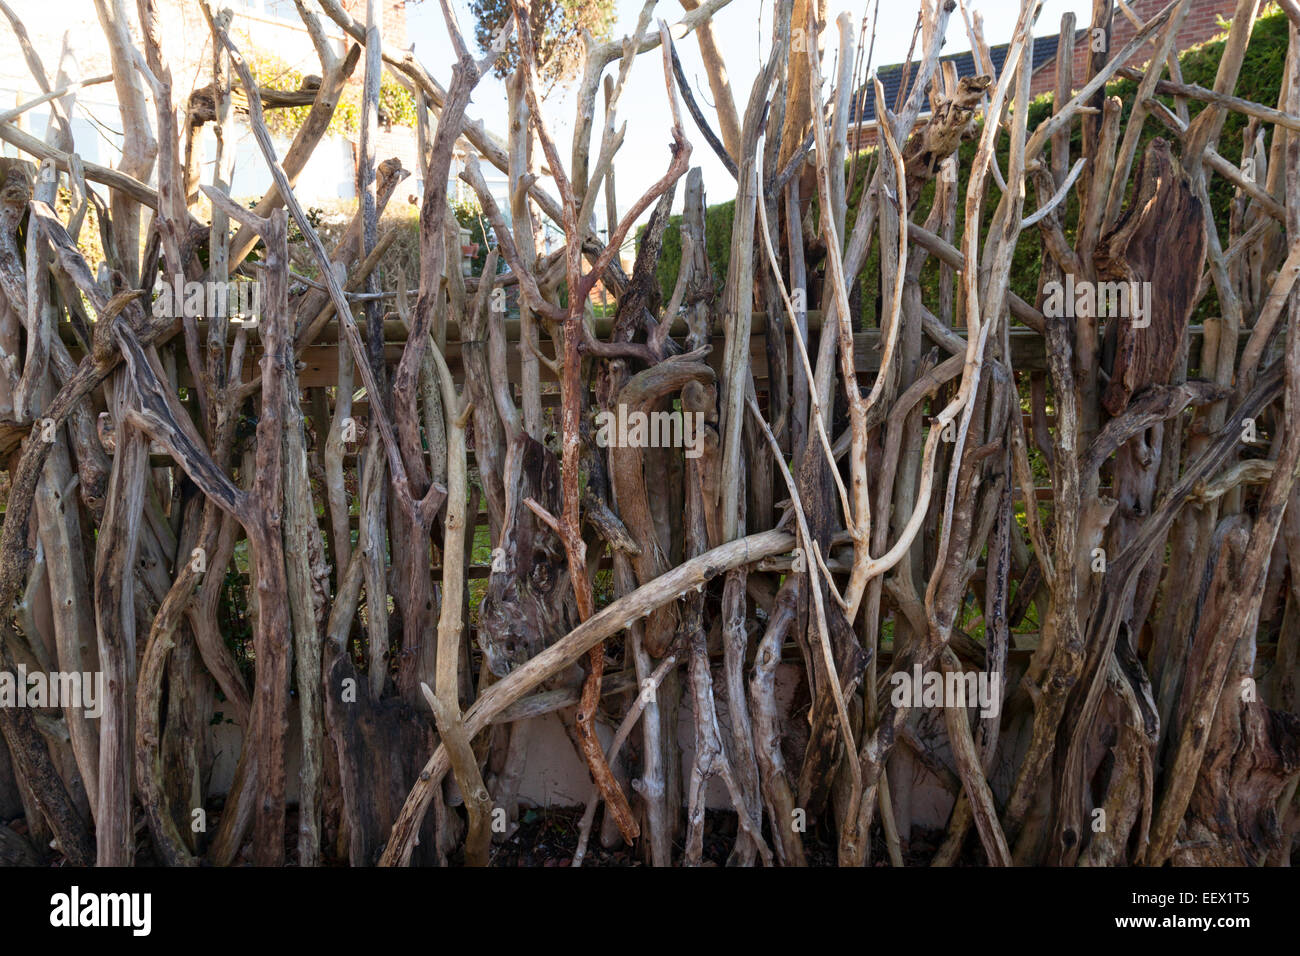 A fence made of driftwood around a private house, Bleadon village, Somerset, England UK Stock Photo